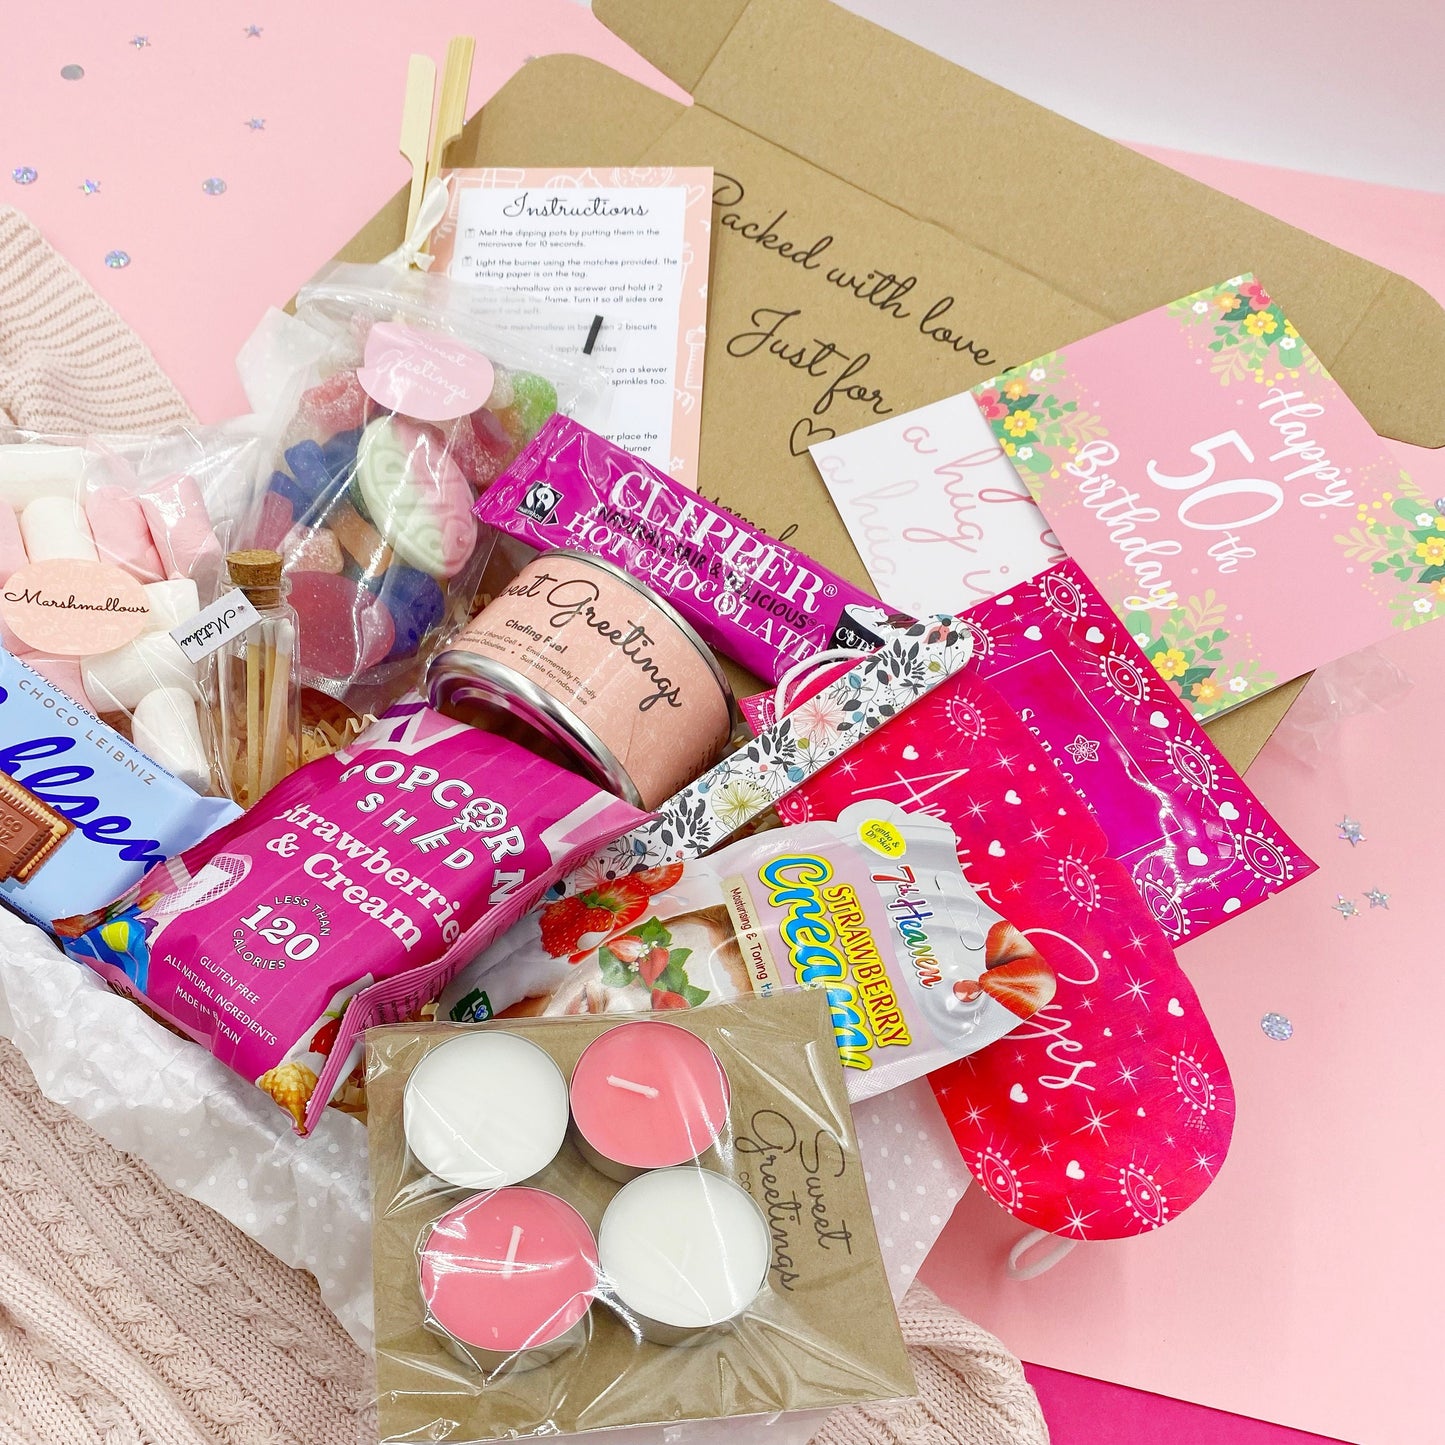 Ultimate Happy 50th Birthday Pink S'mores Gift box, Pamper Hamper, Spa Kit, Care Package, De Stress, Gift For Her, Present, Milestone, Smore